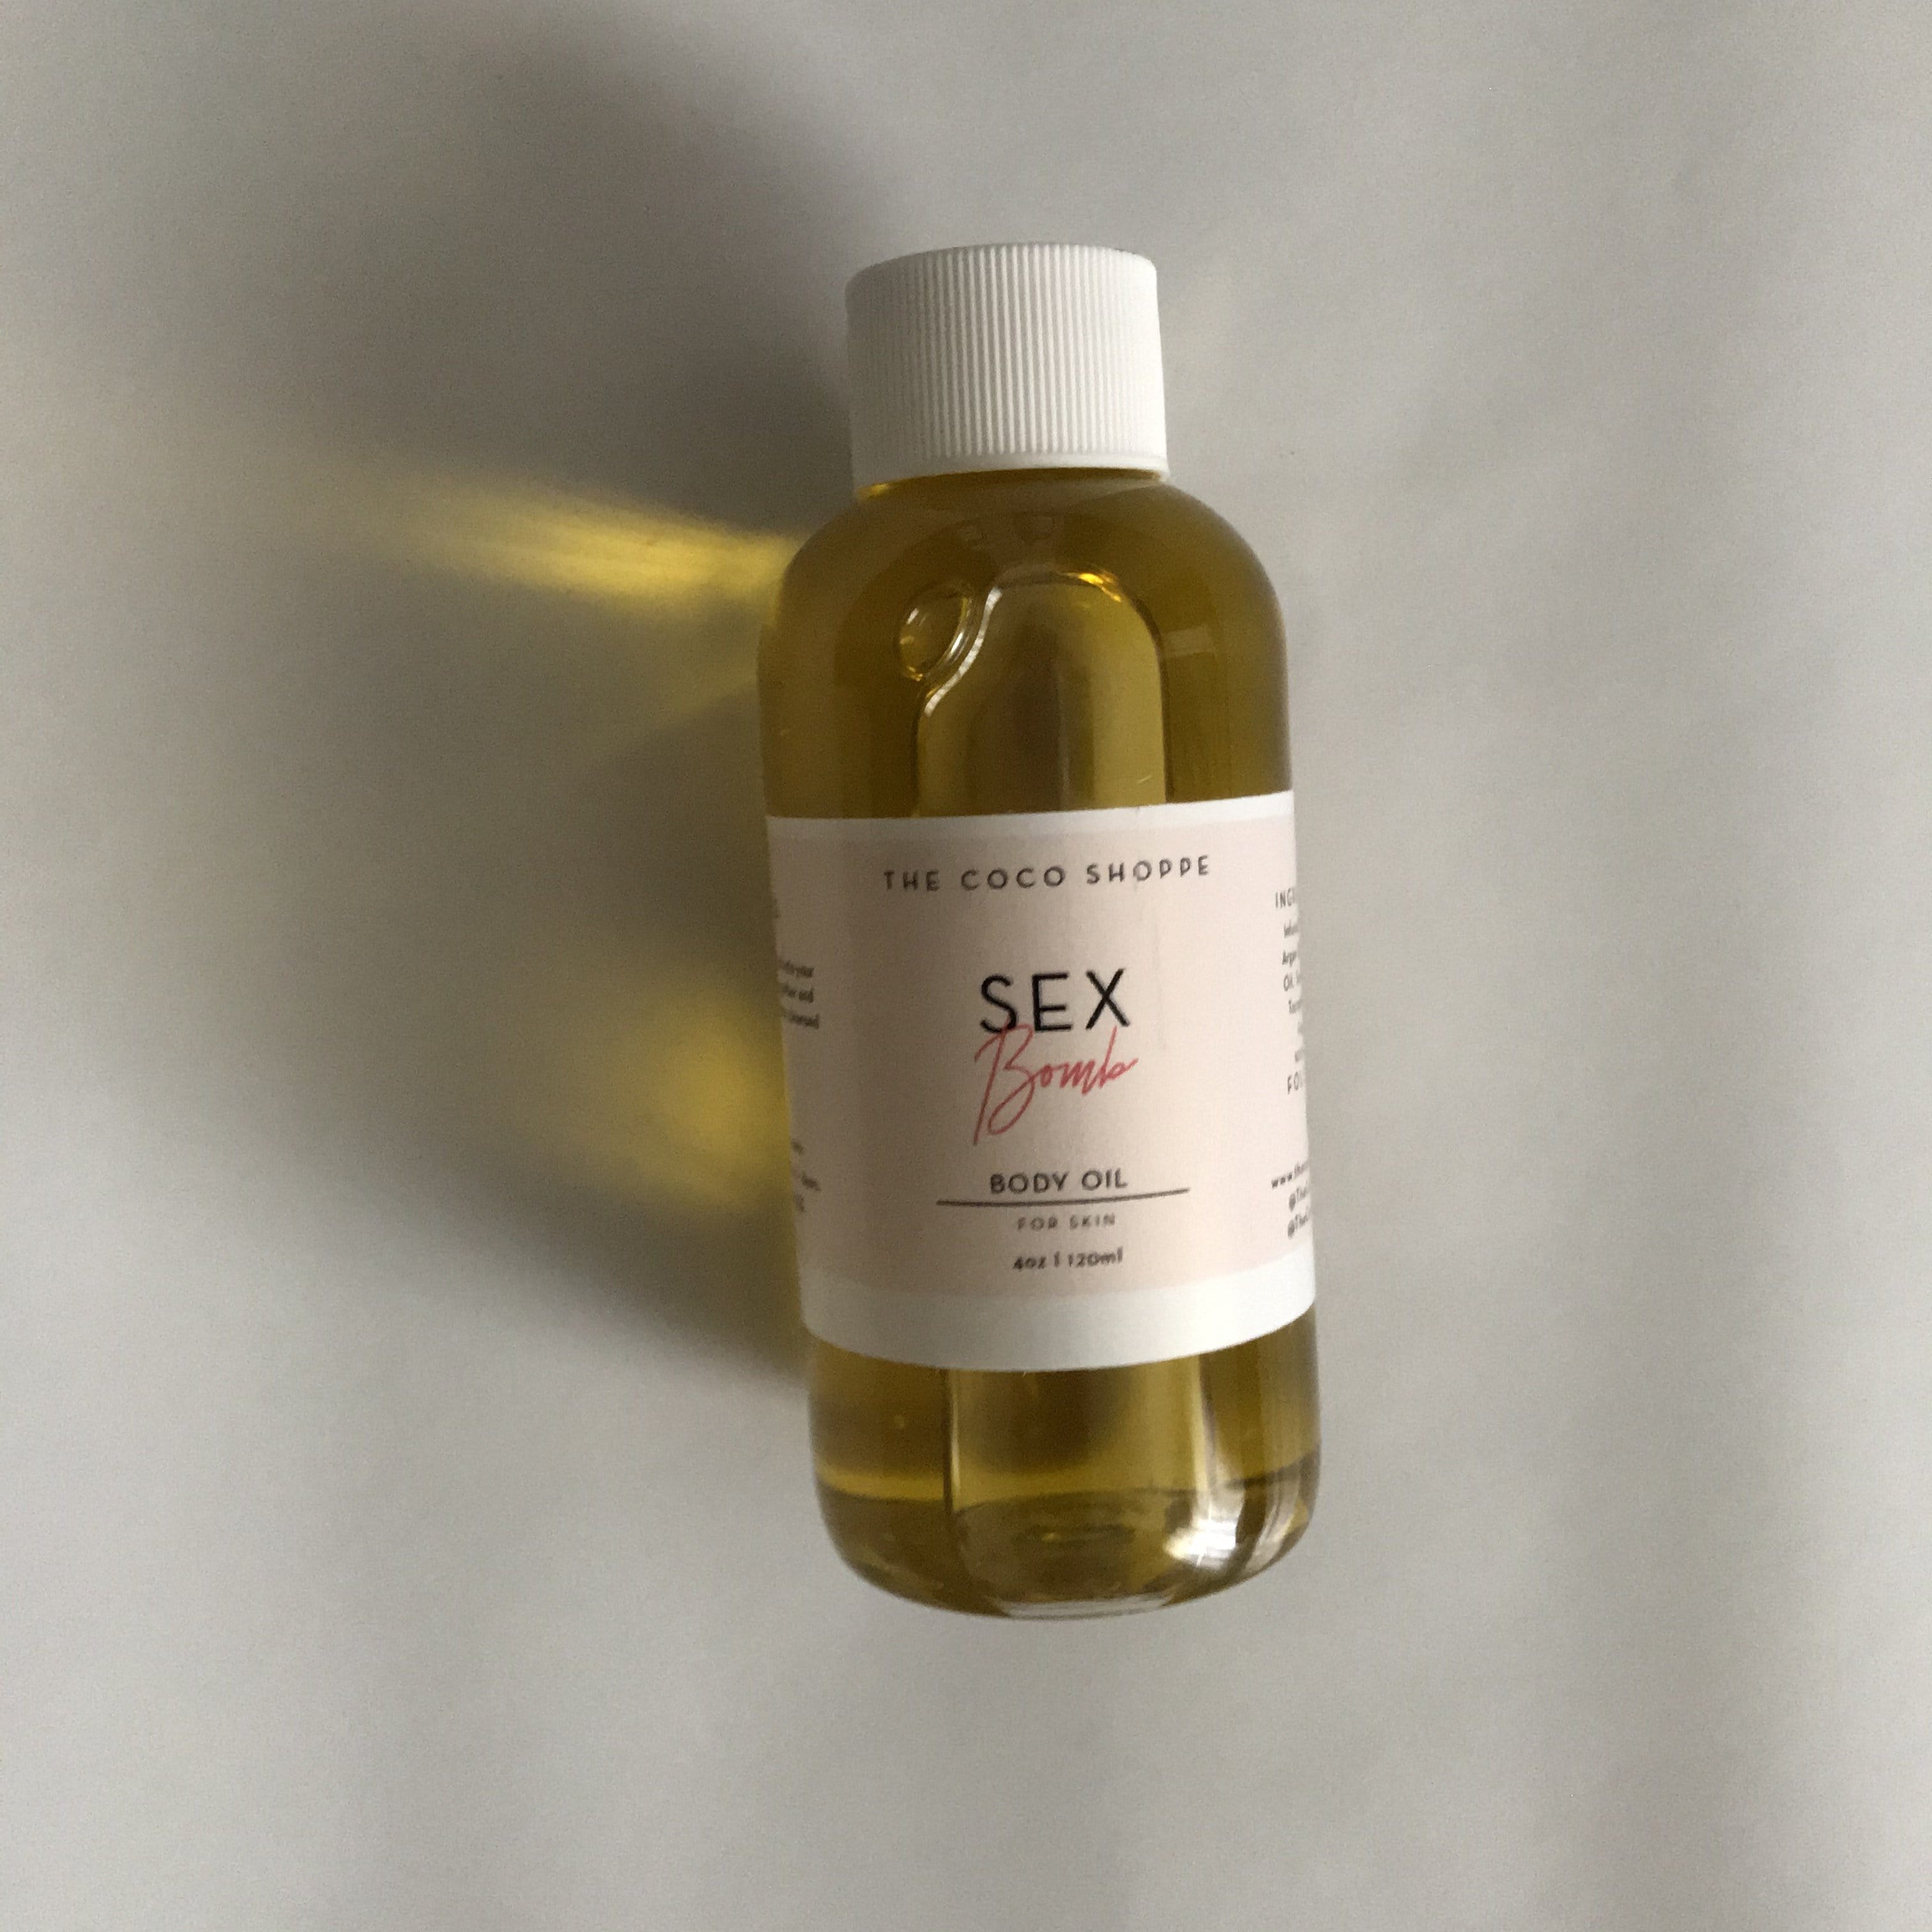 Herbal Infused Body Oil - The Coco Shoppe